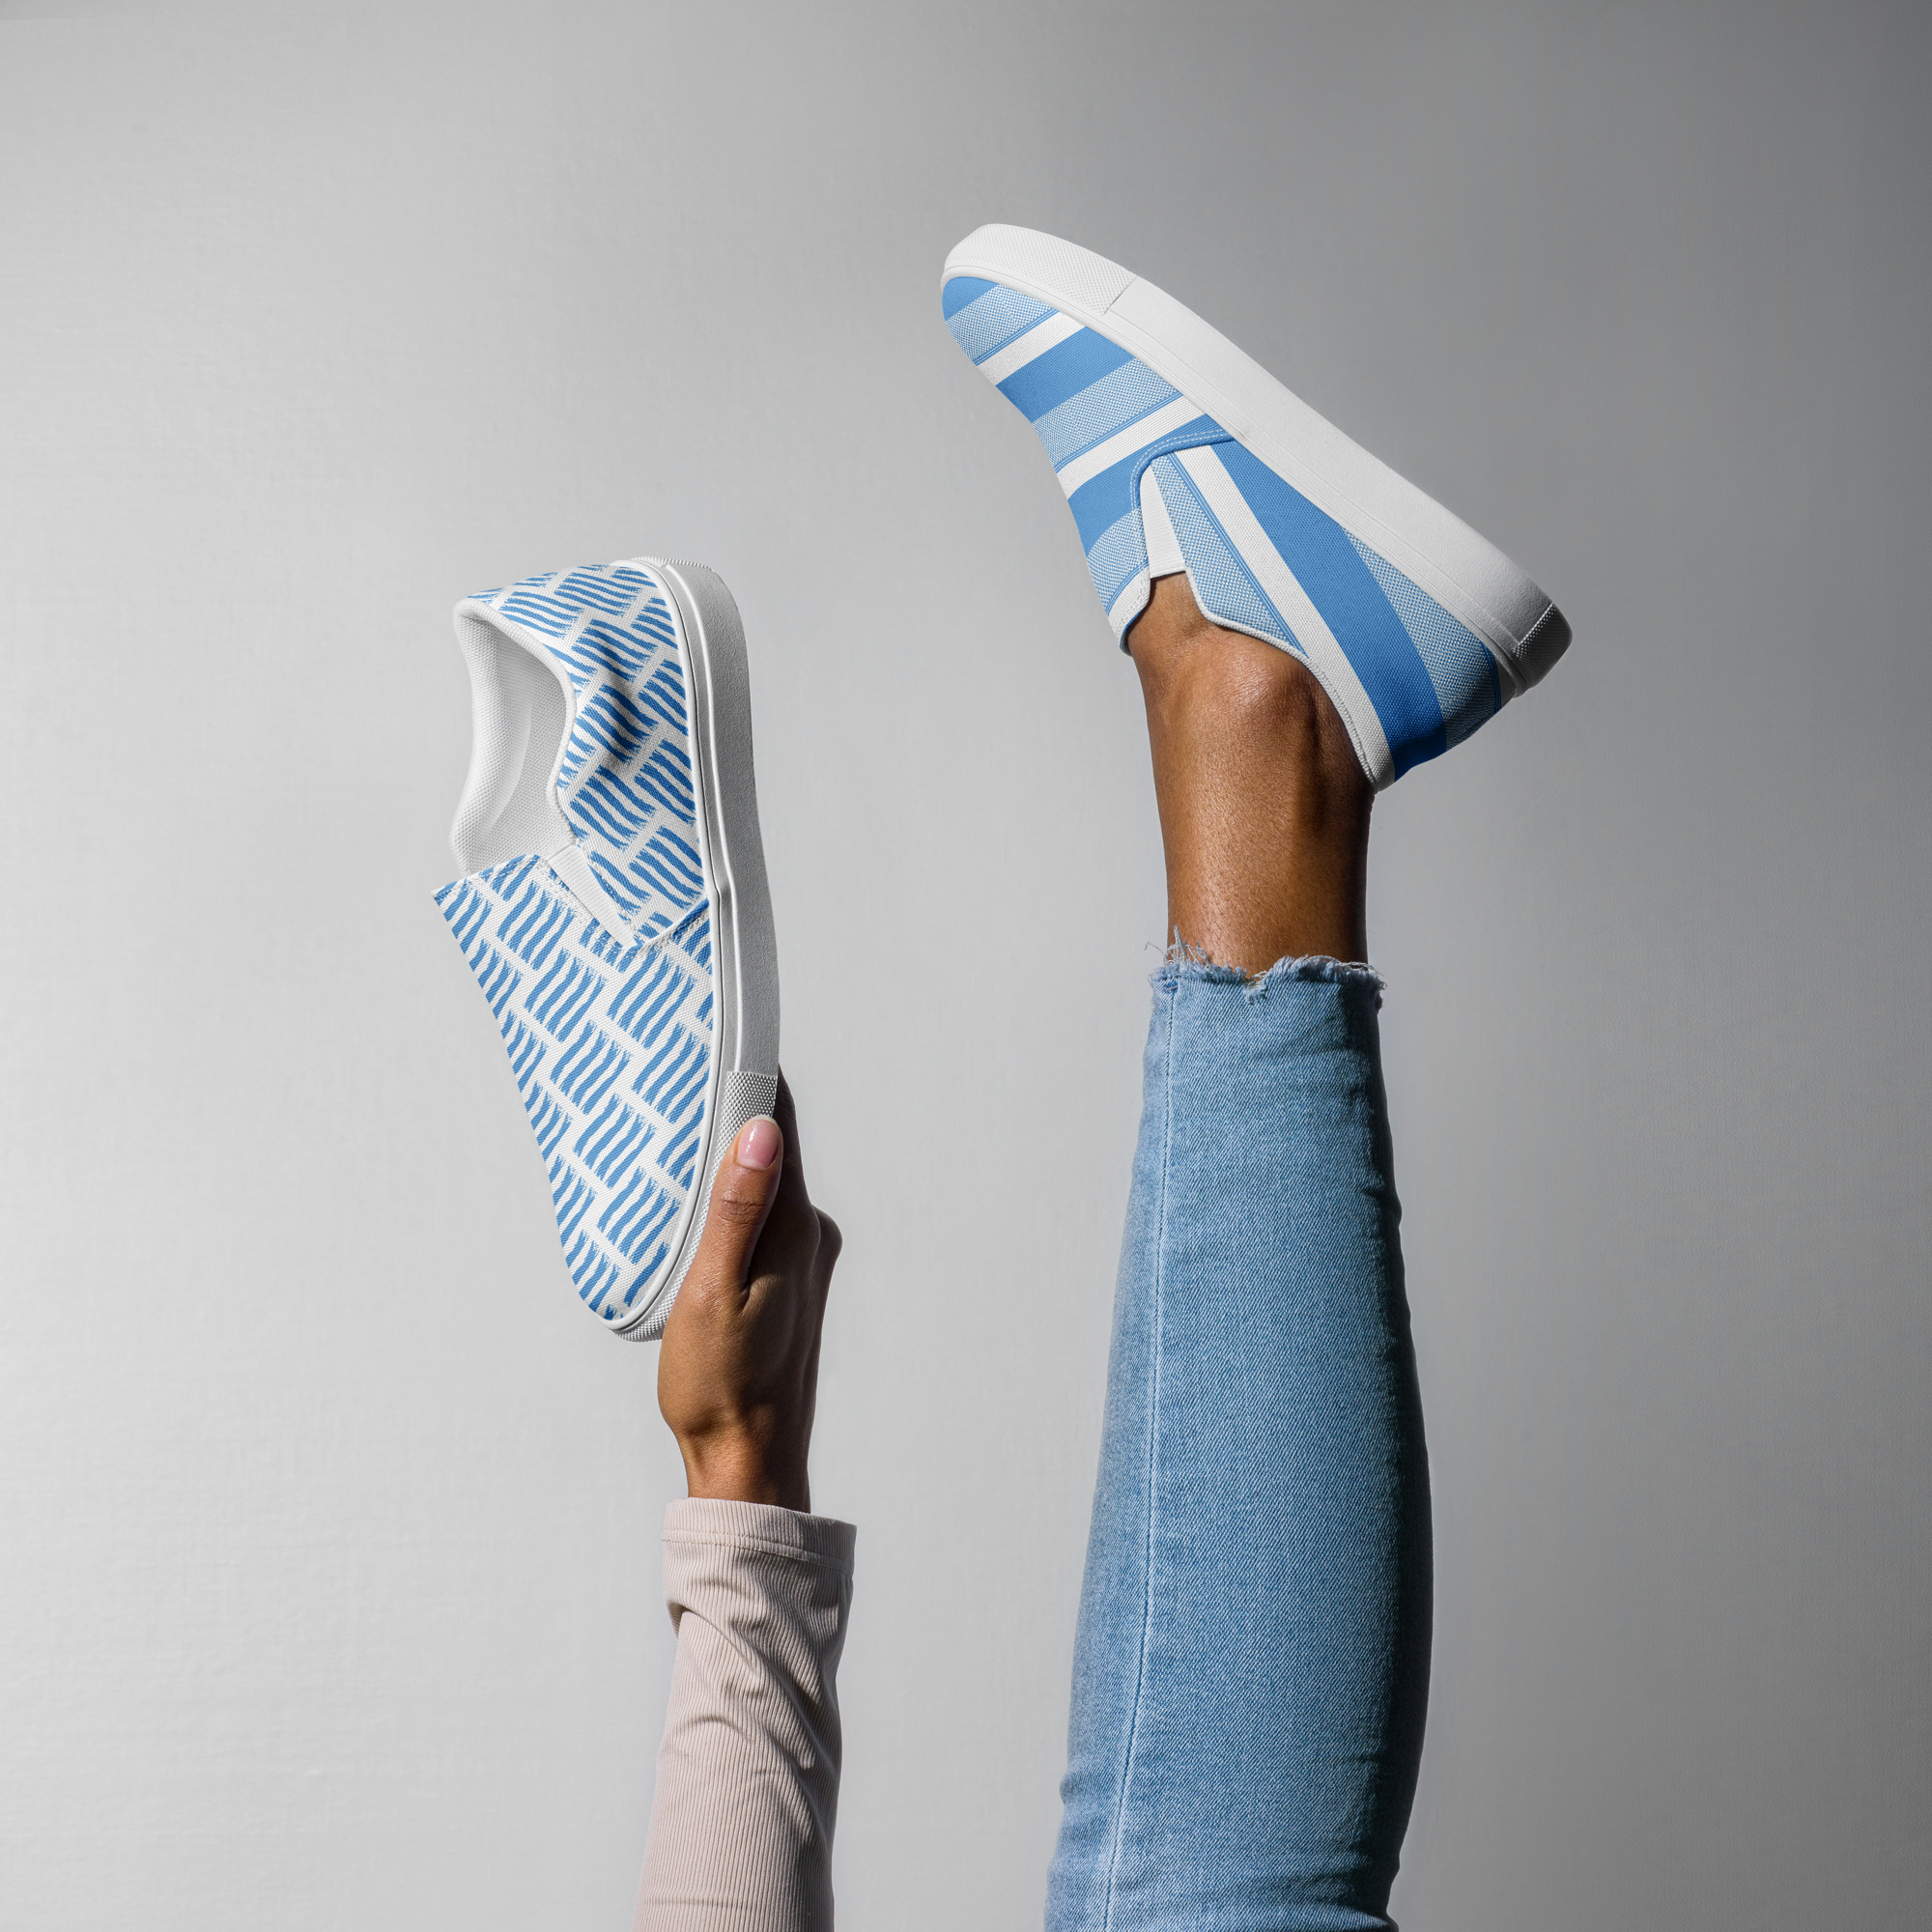 Introducing the "Argentinas" ...the light blue and white Women Slip on Canvas Shoes in the 2023-2024 ACVKs shoe line.